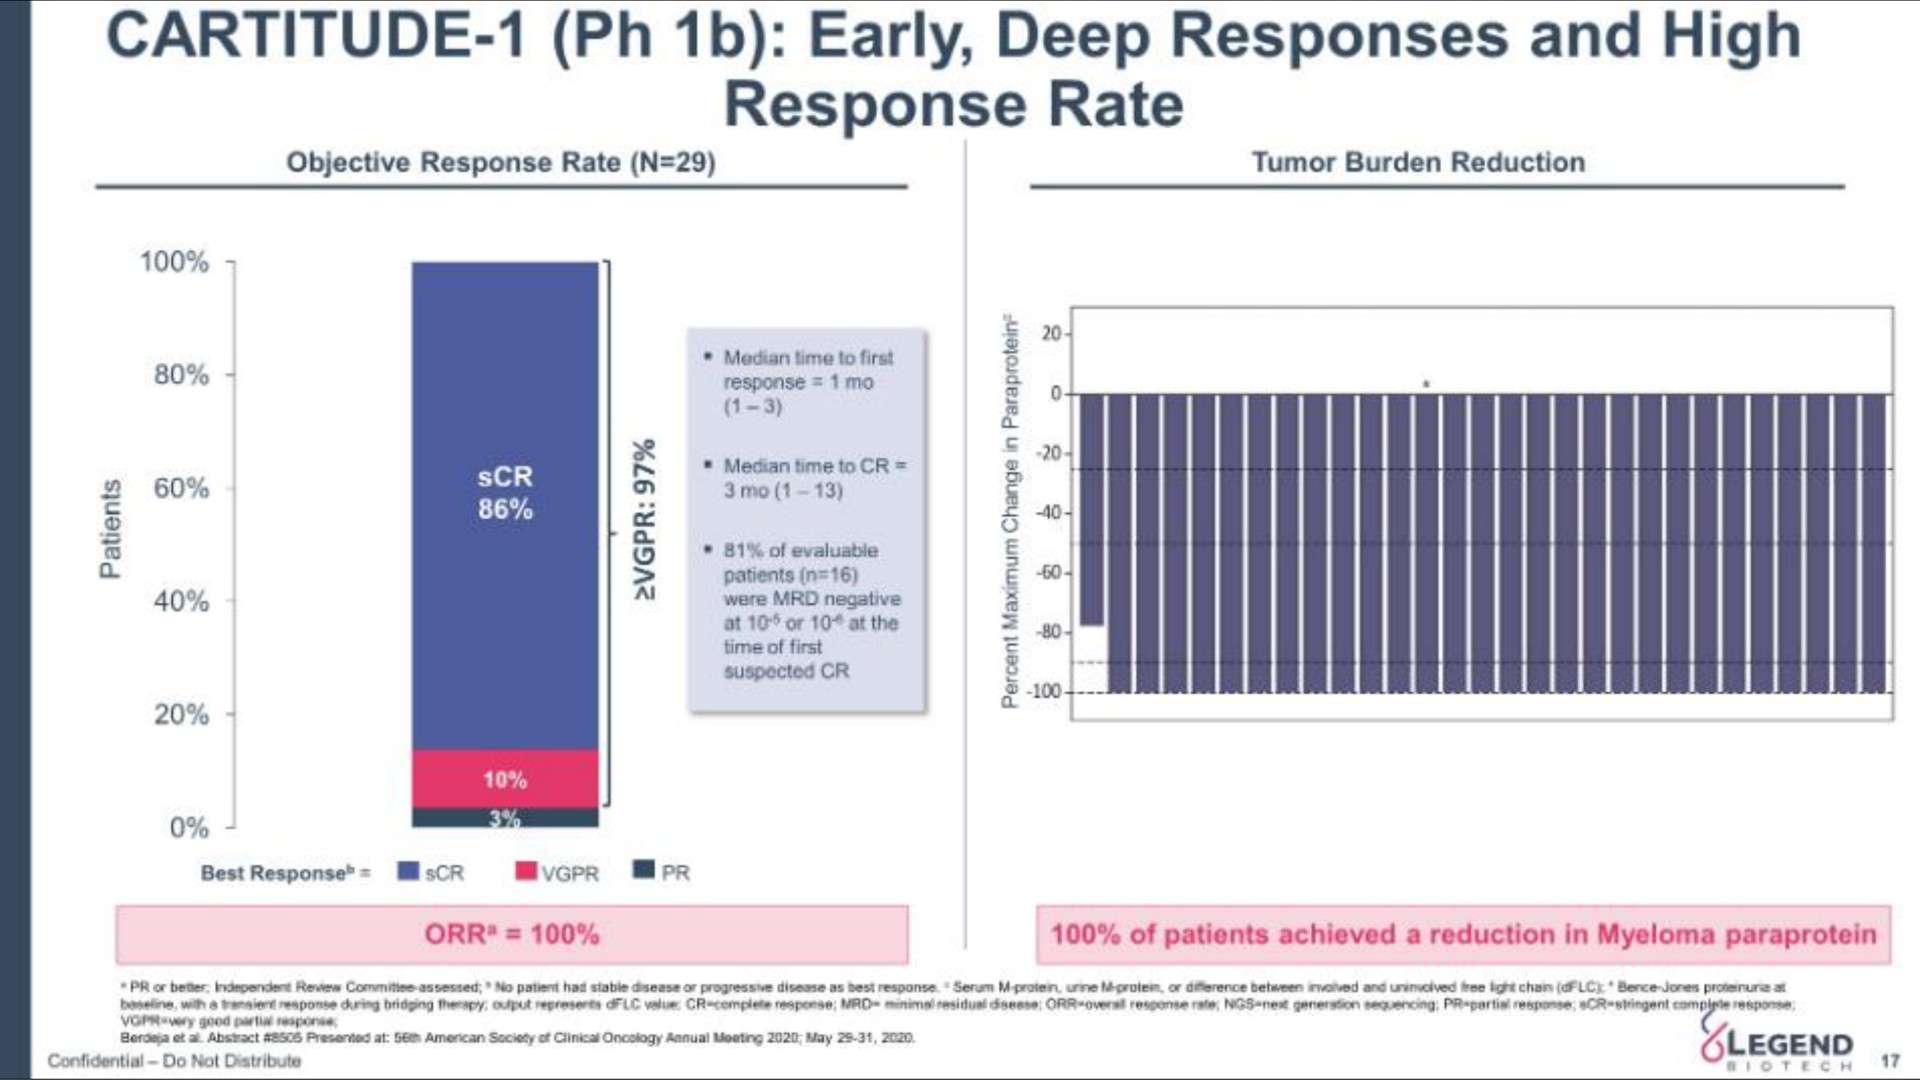 early deep responses and high response rate | Legend Biotech